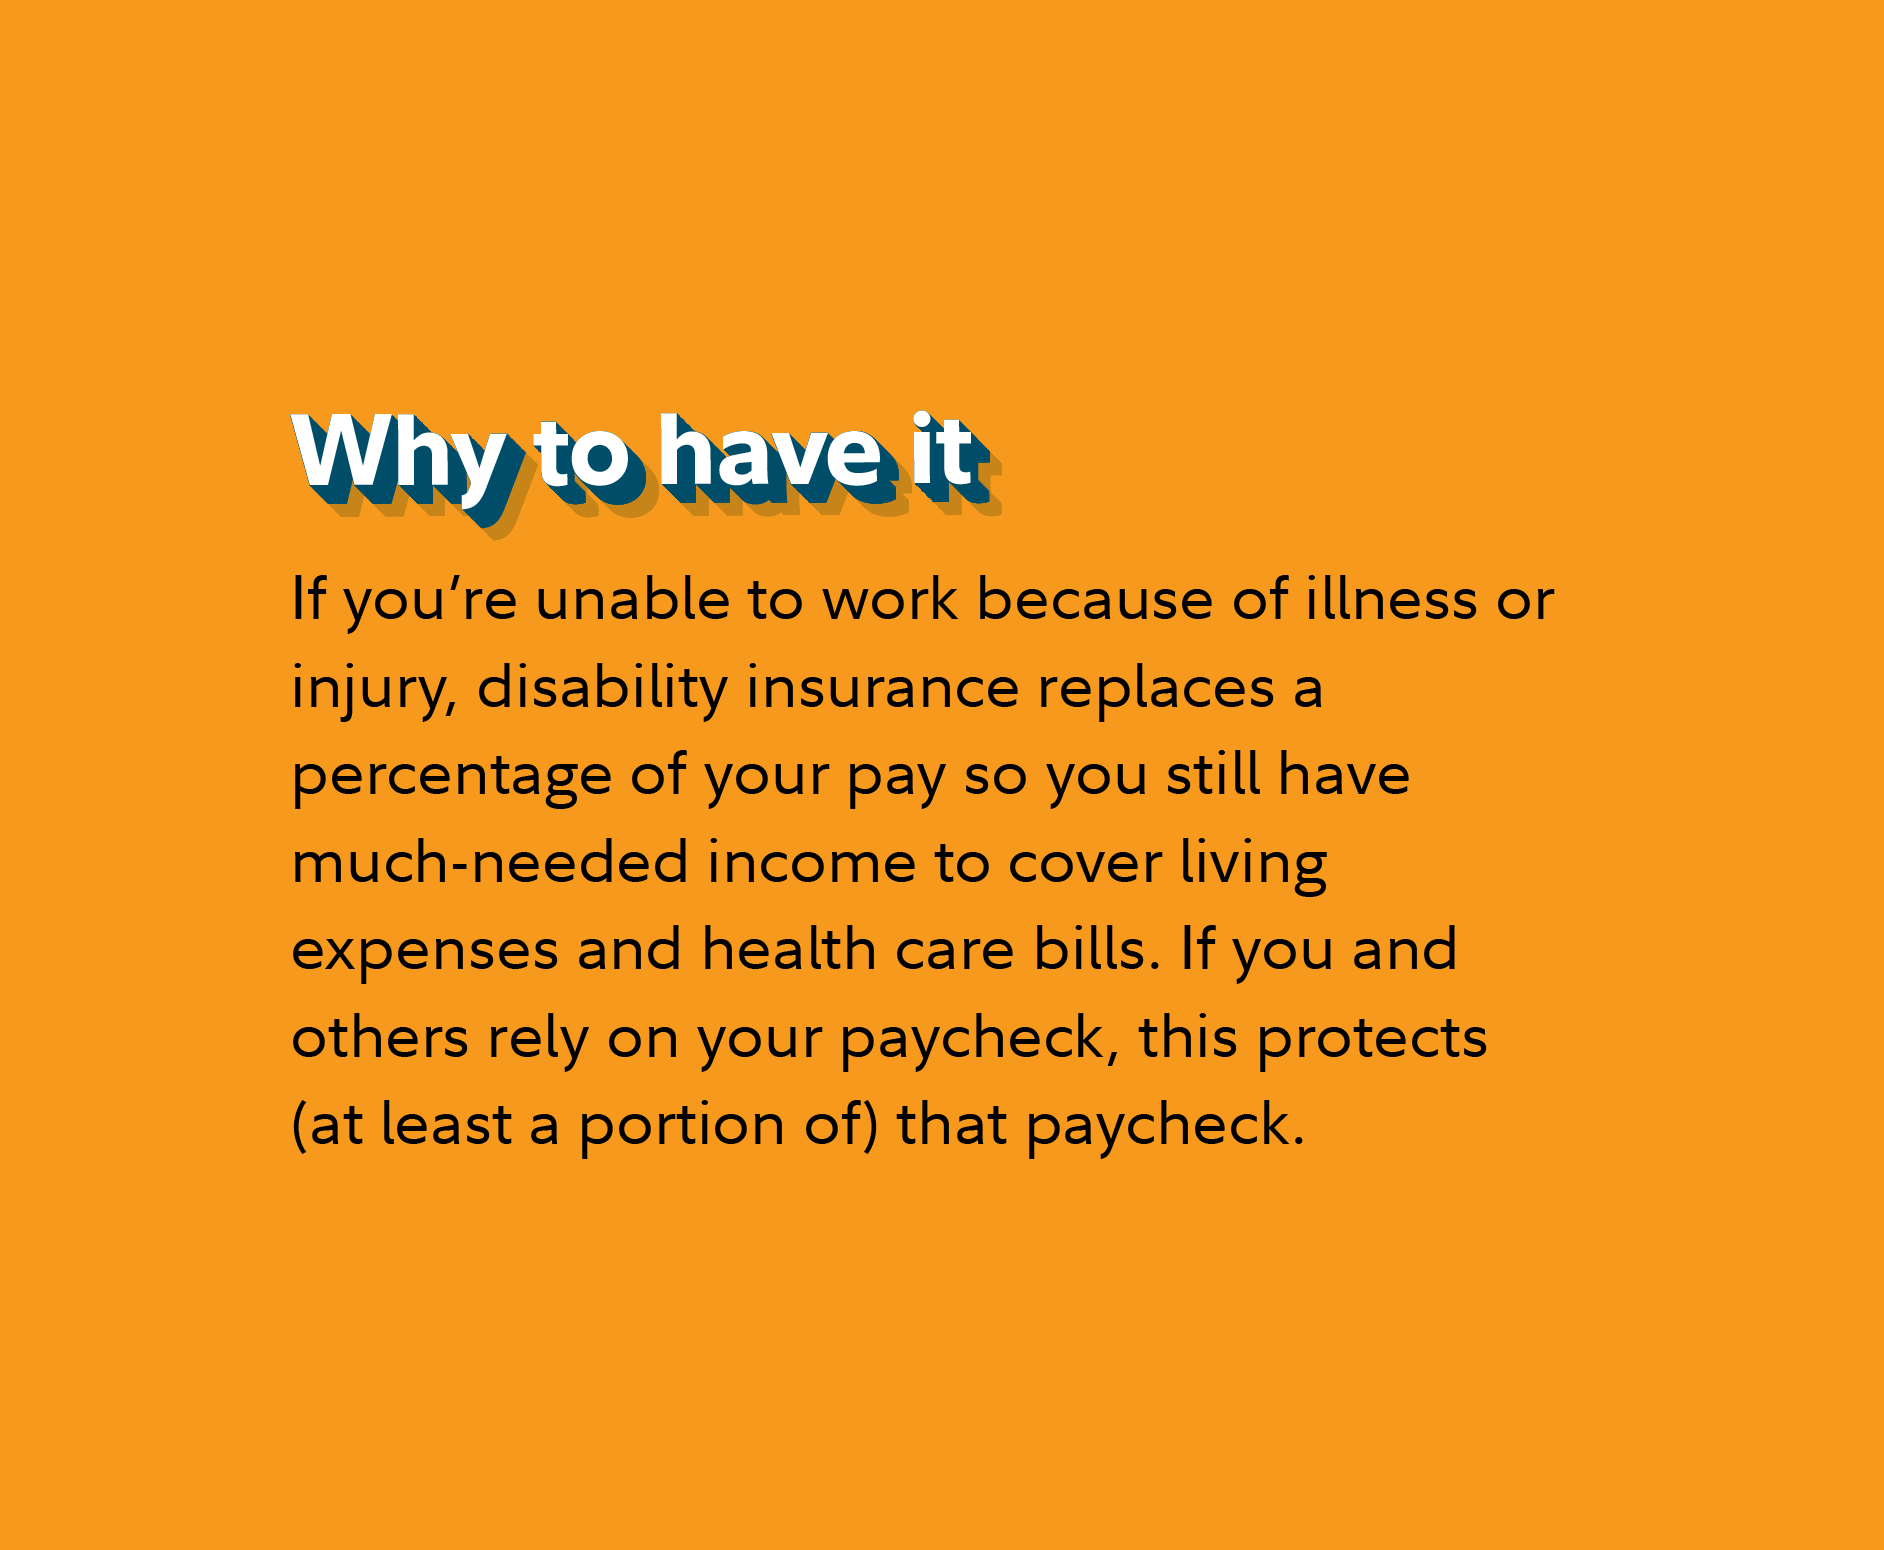 Why to have it If you’re unable to work because of illness or injury, disability insurance replaces a percentage of your pay so you still have much-needed income to cover living expenses and health care bills. If you and others rely on your paycheck, this protects (at least a portion of) that paycheck. 